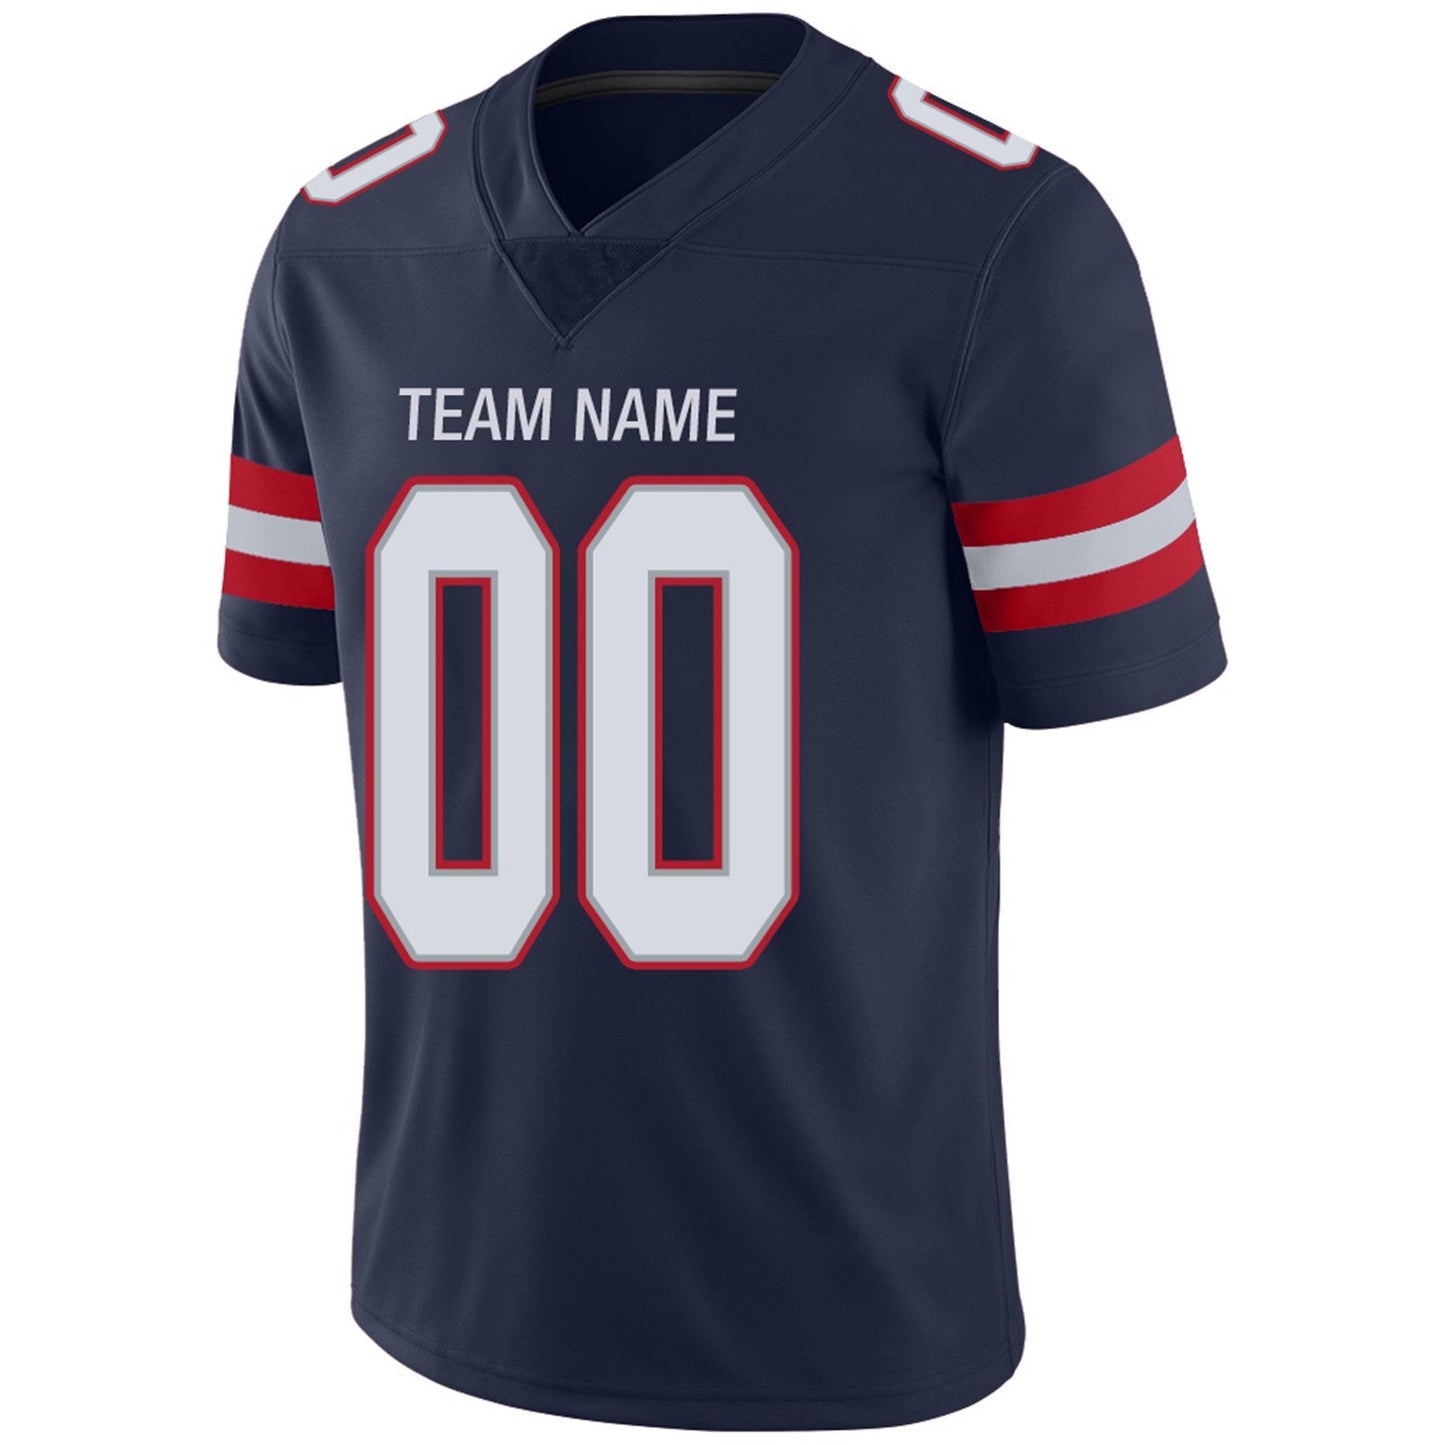 Custom NE.Patriots Football Jerseys Team Player or Personalized Design Your Own Name for Men's Women's Youth Jerseys Navy